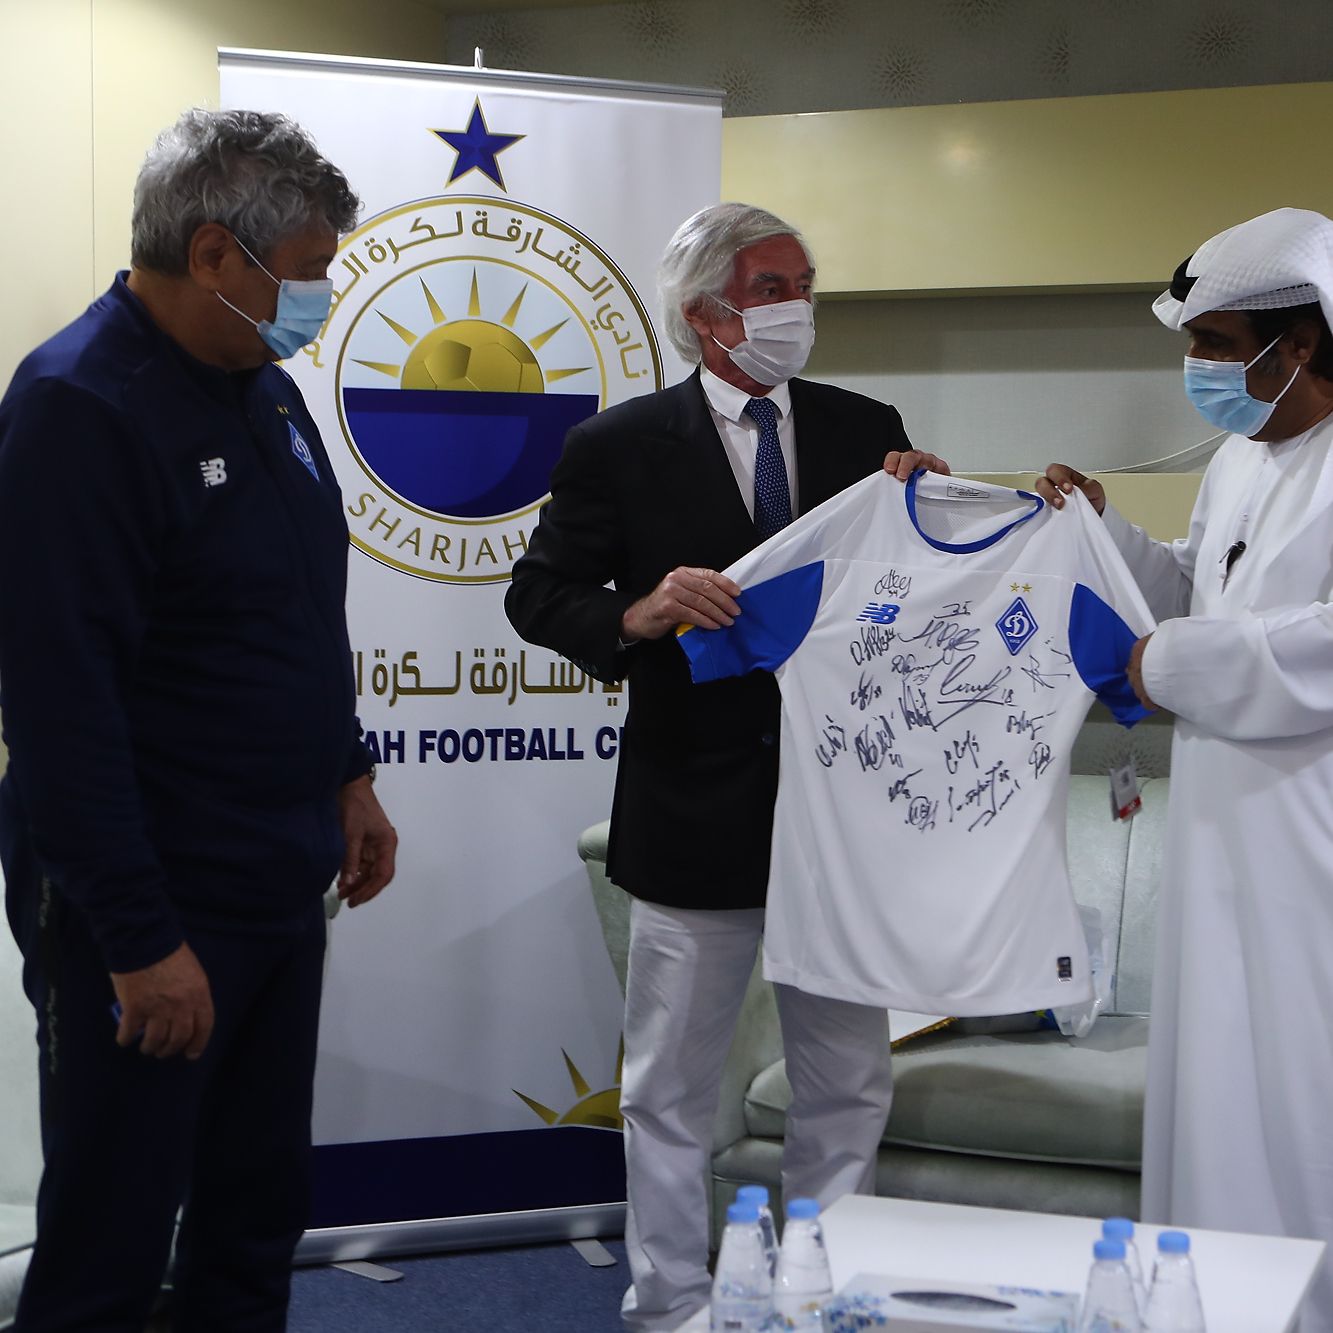 VIDEO: Hospitality visit from Sharjah FC direction